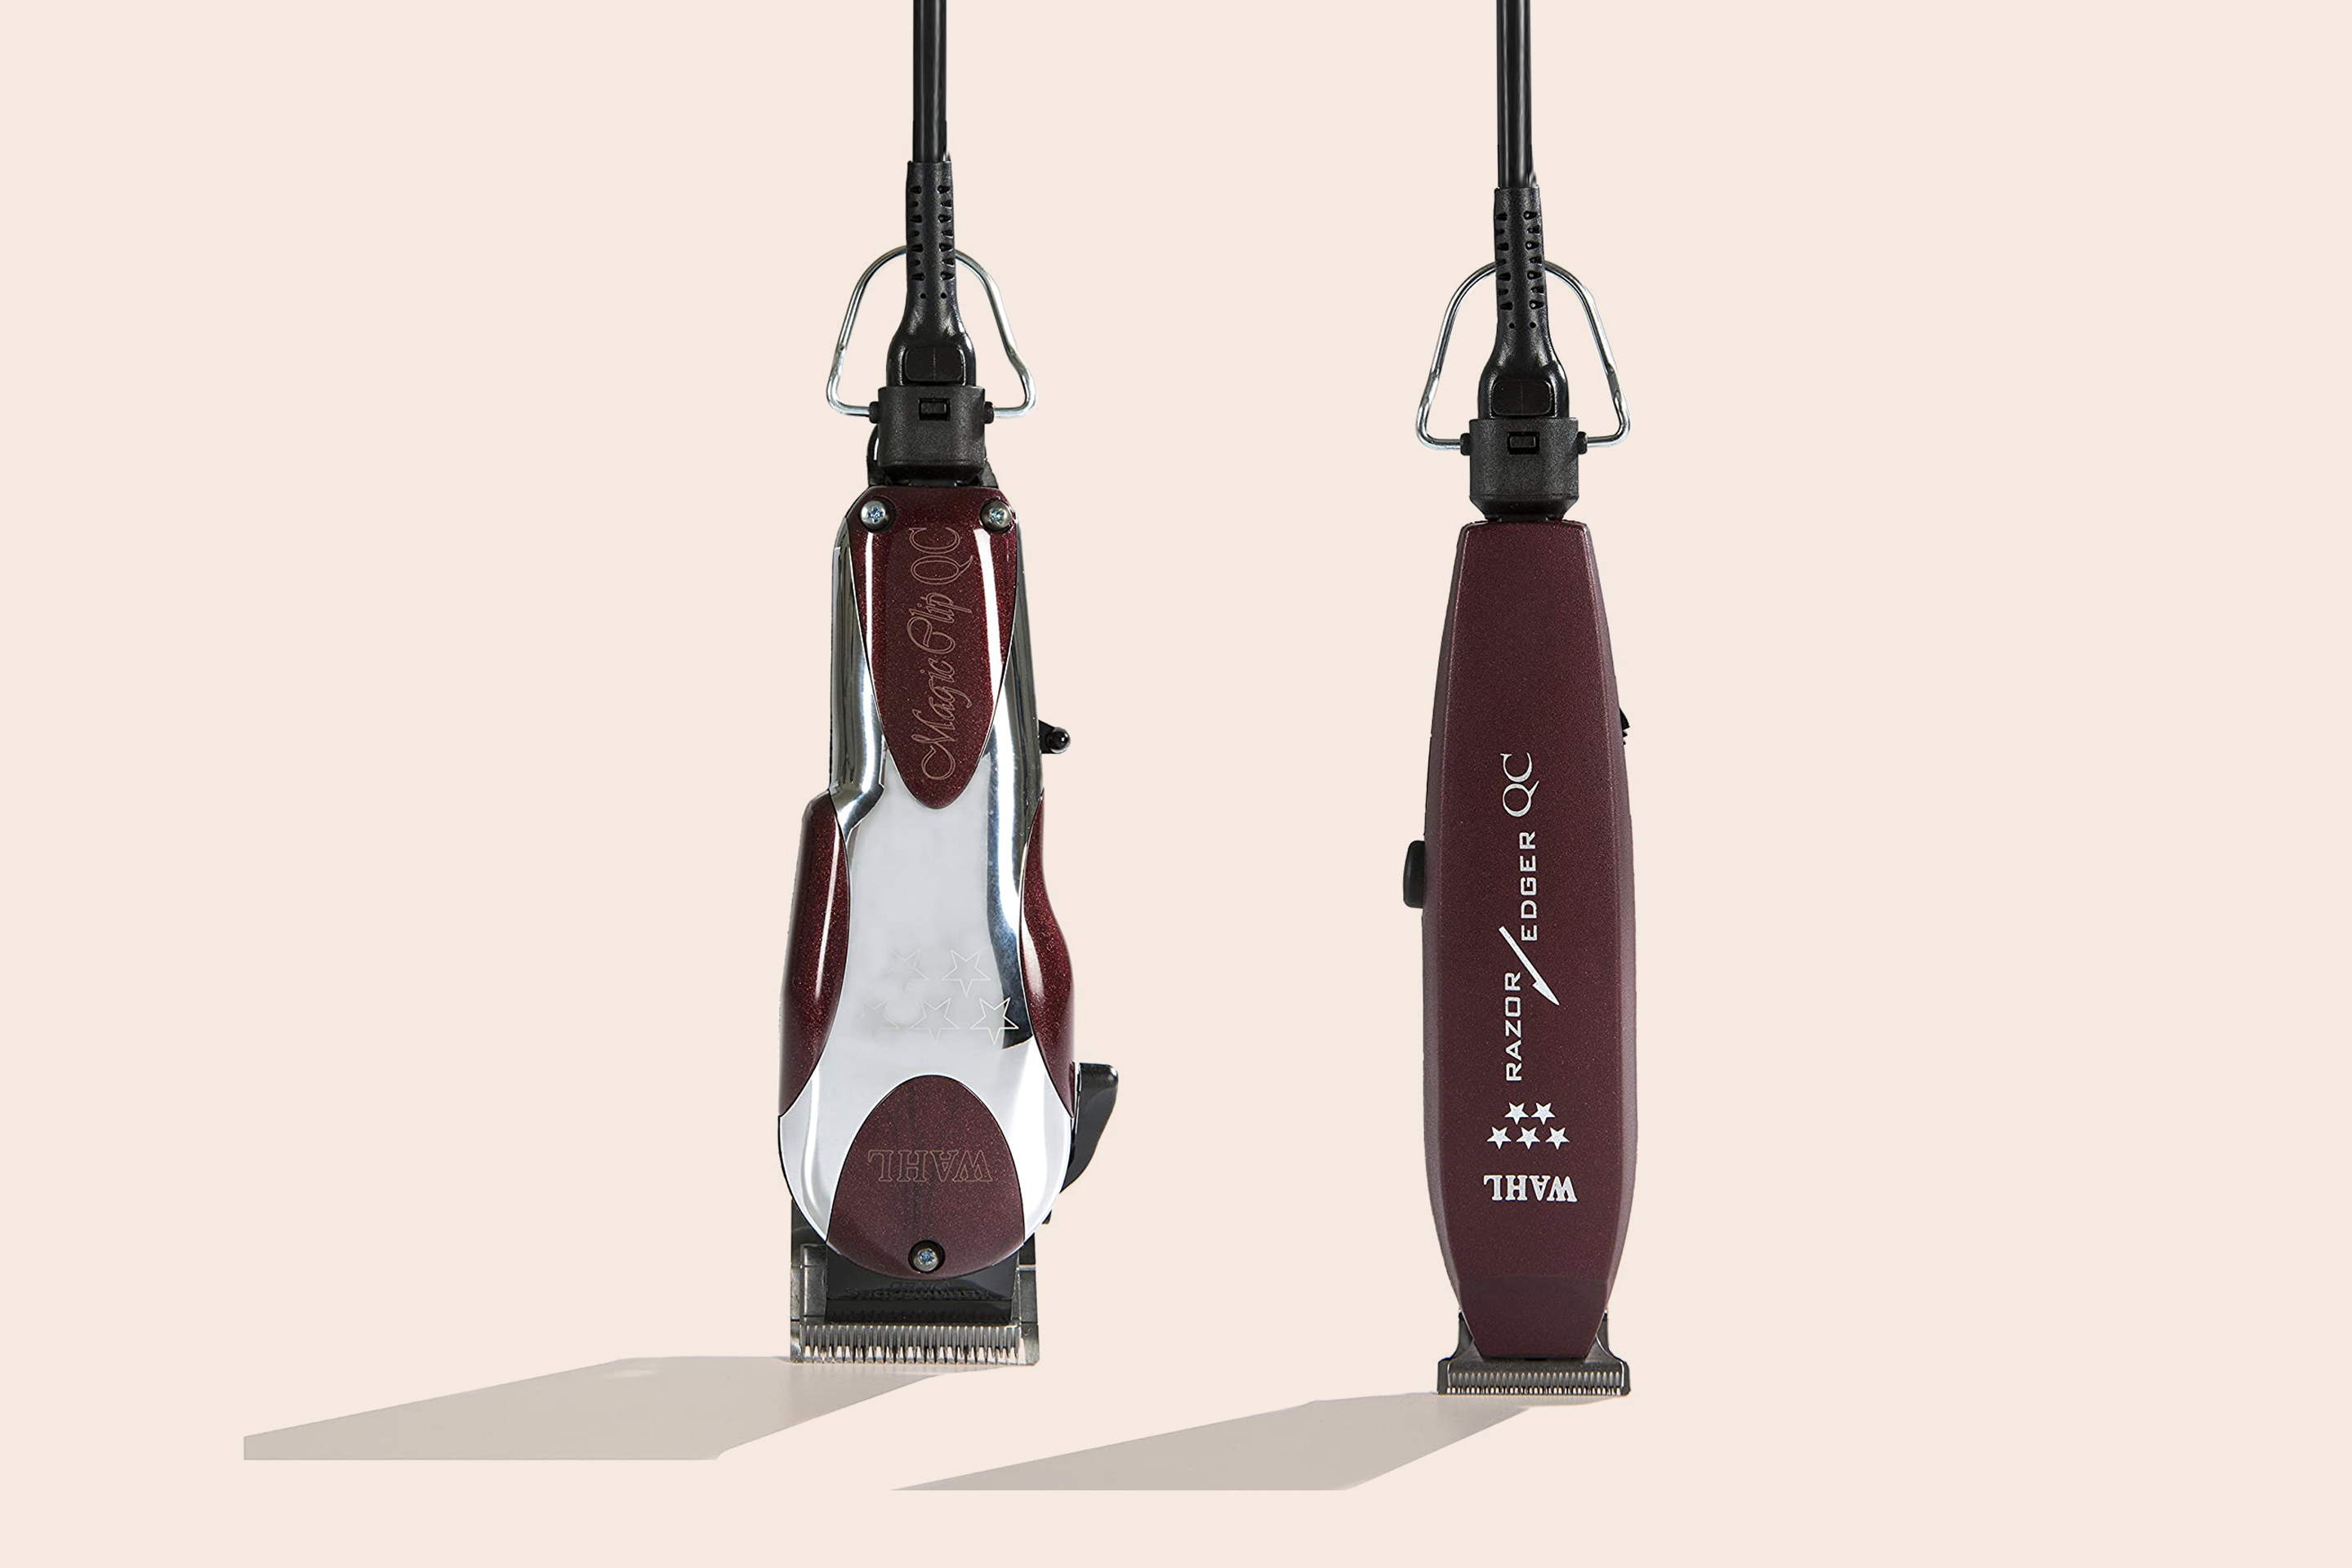 Best hair clippers